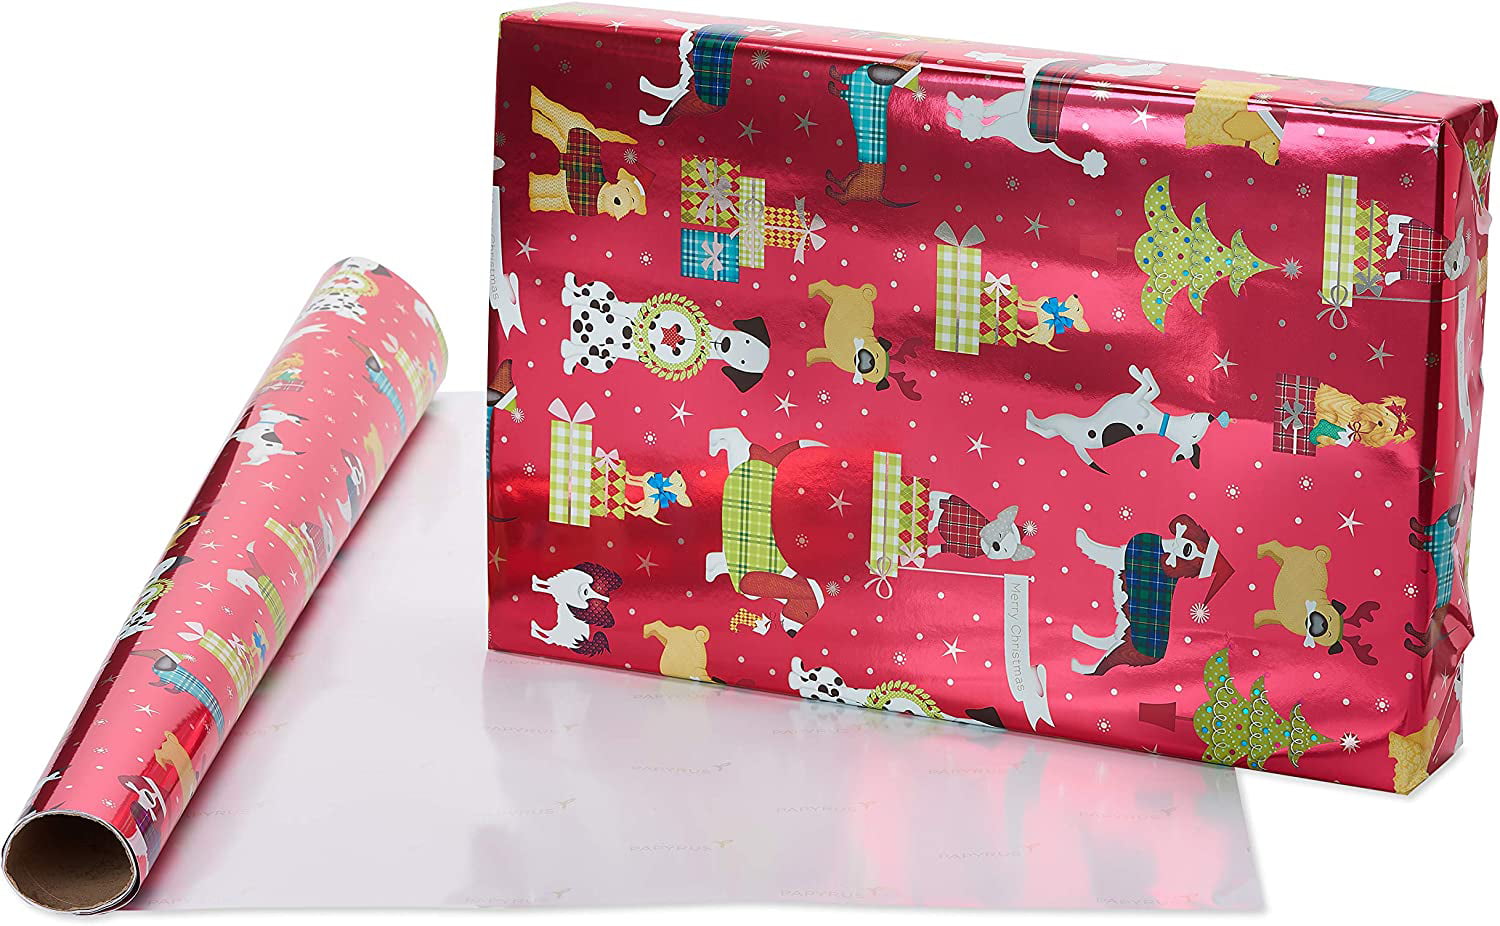 Papyrus Christmas Wrapping Paper Rolls for Kids, Forest Friends, Festive Friends, Koalas (3 Rolls, 90 Sq. ft.)